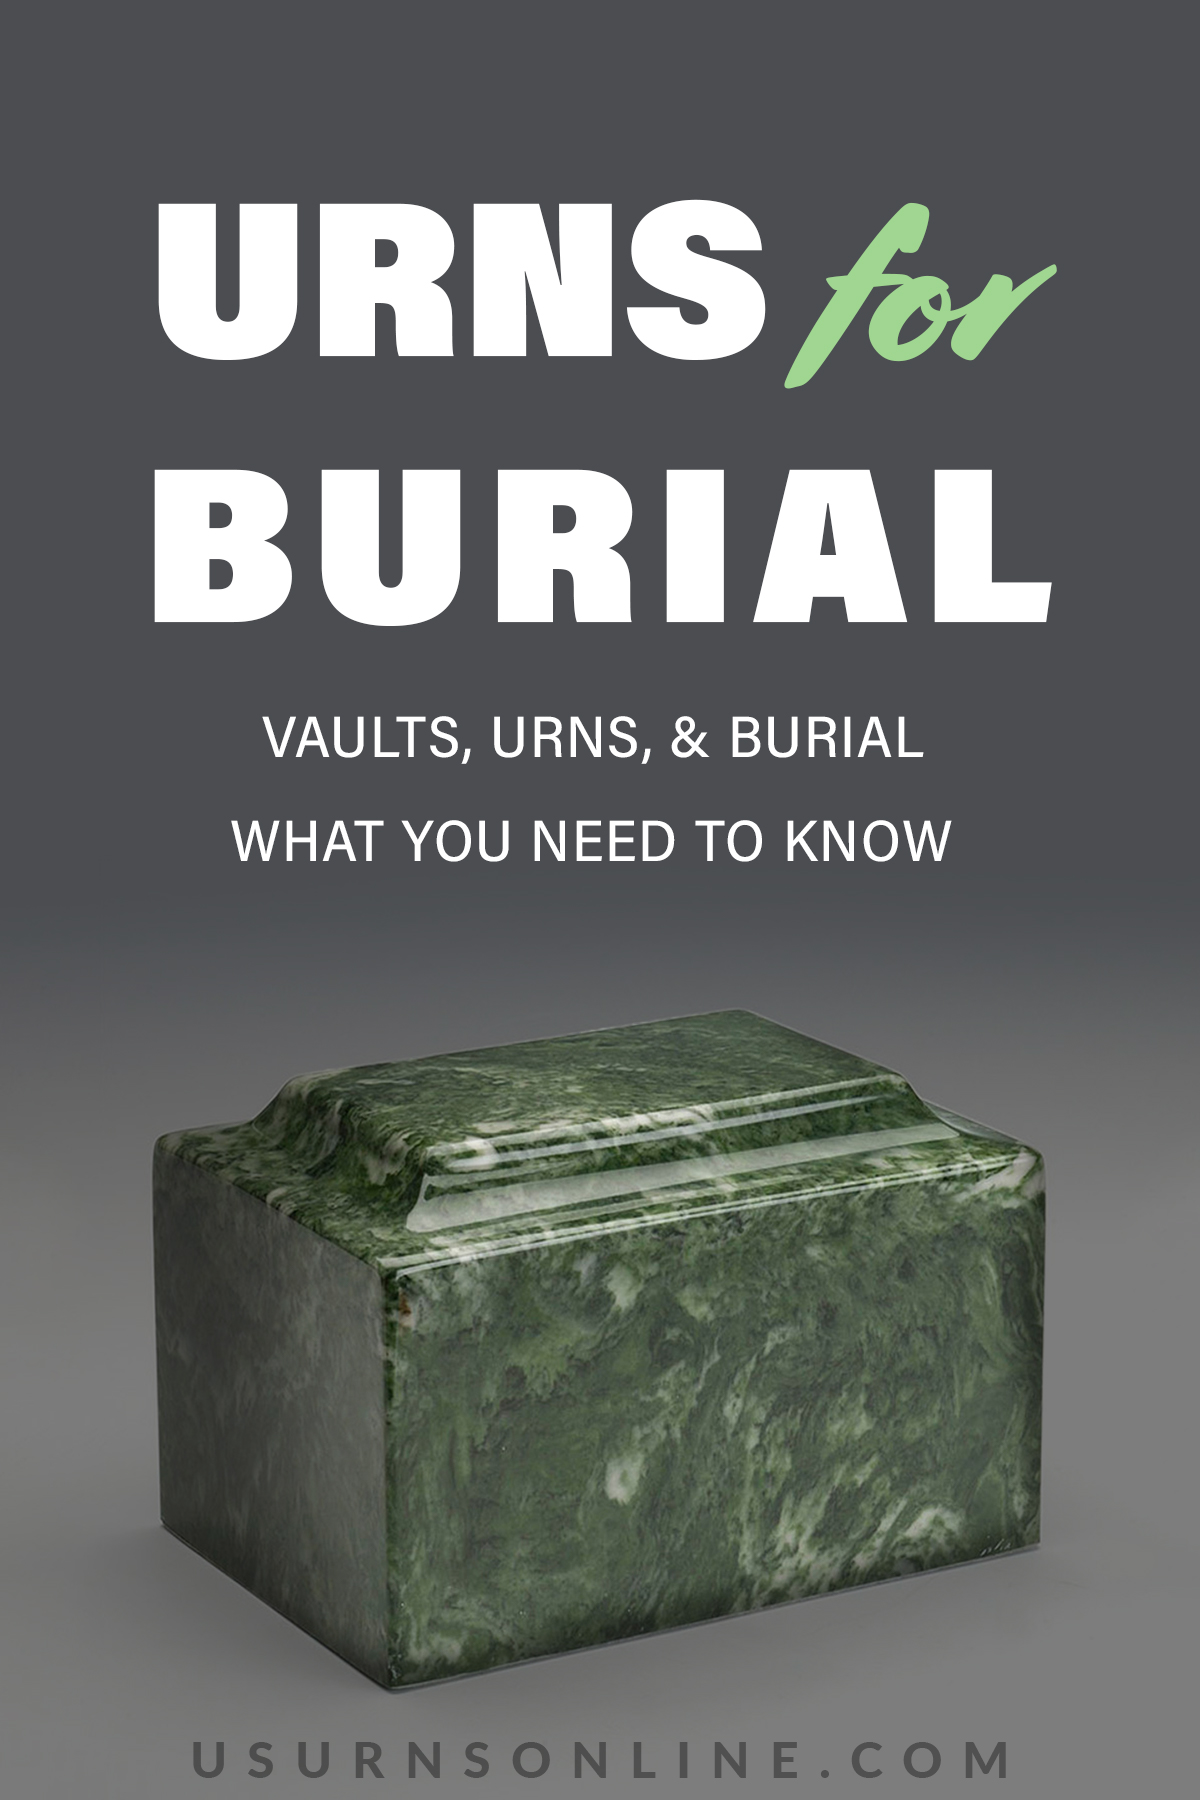 cremation urns that you can bury - feature image